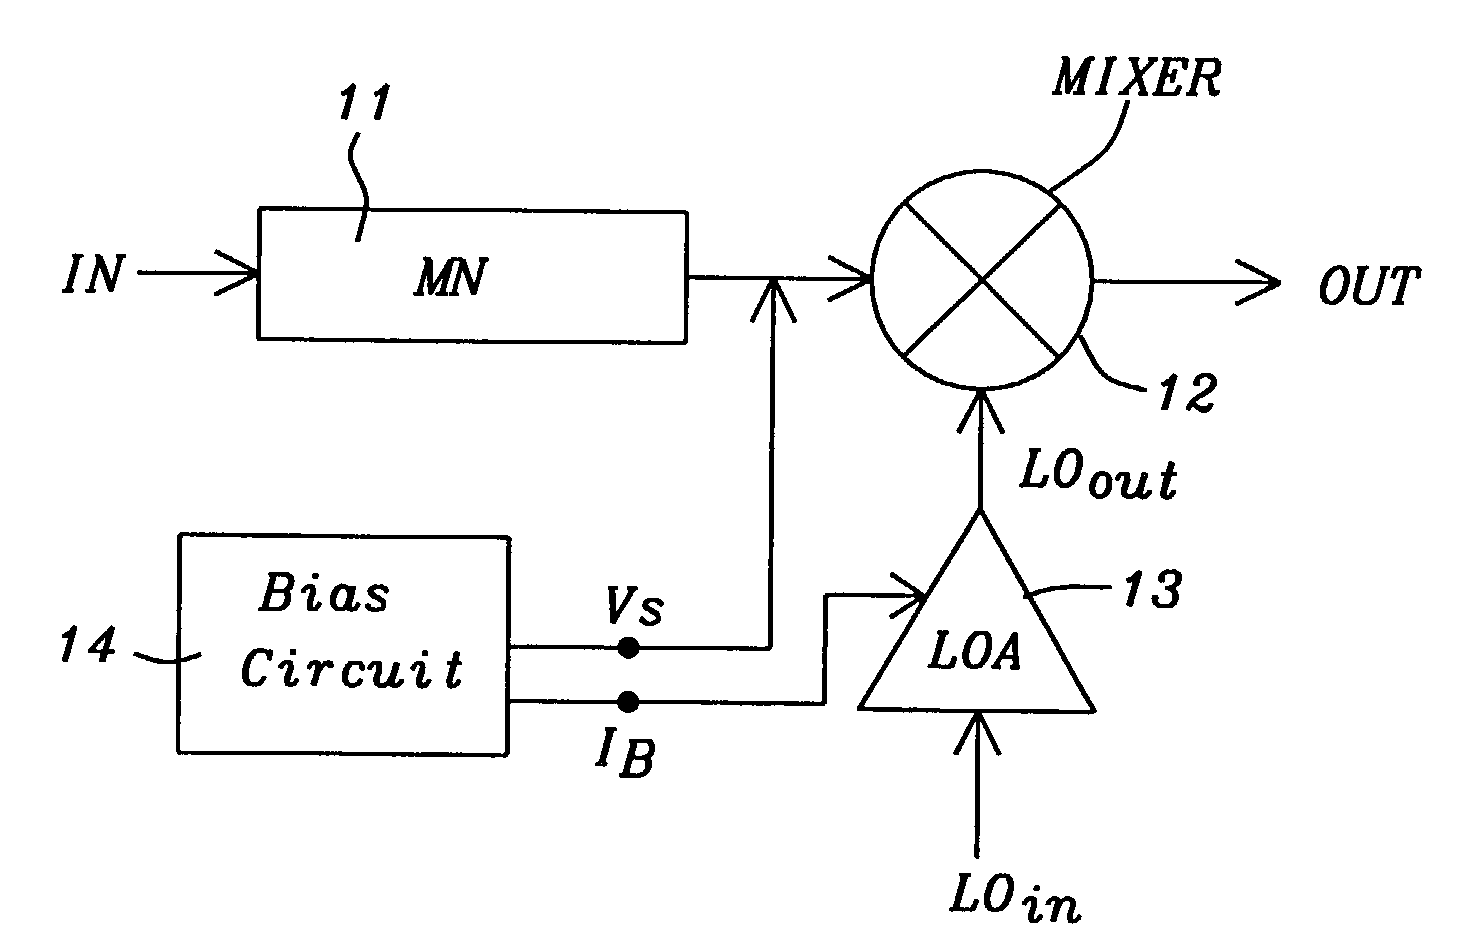 Threshold voltage (Vth), power supply (VDD), and temperature compensation bias circuit for CMOS passive mixer